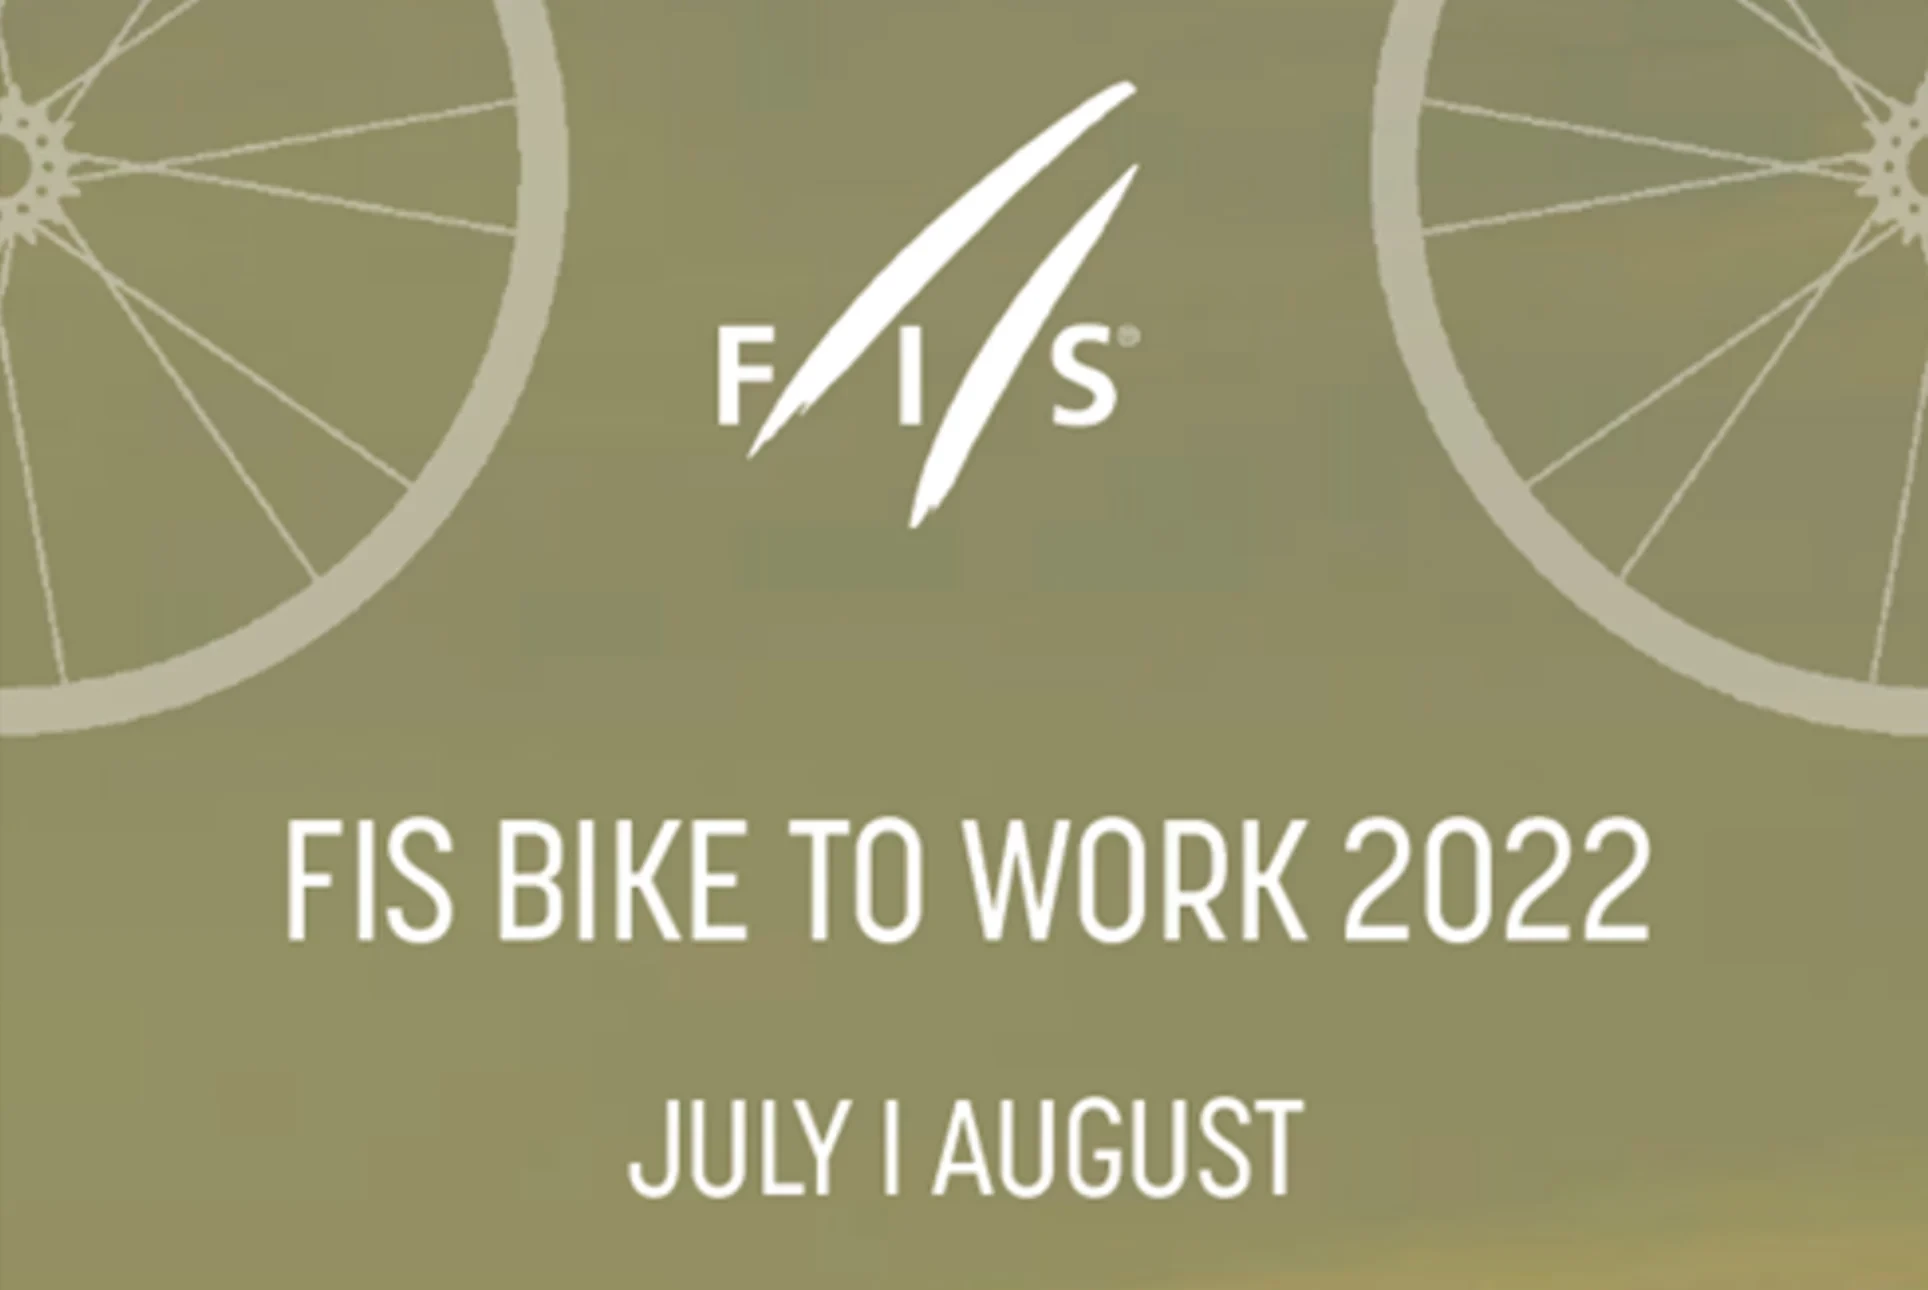 FIS has re-introduced the Bike to Work Challenge ©FIS